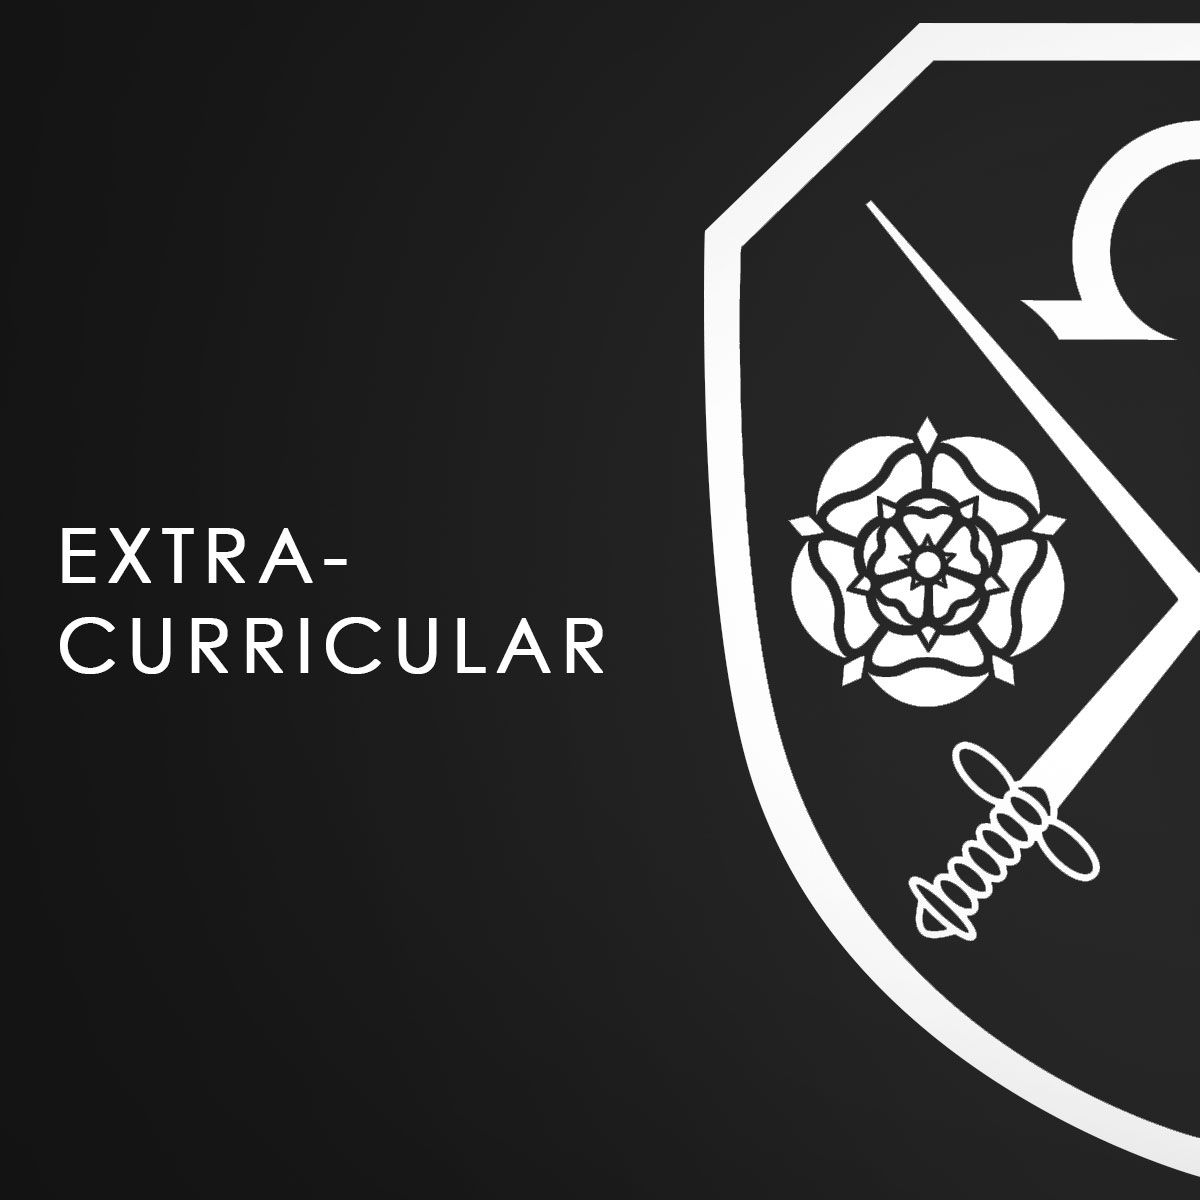 A black background with the East Barnet School logo which says Extra-Curricular